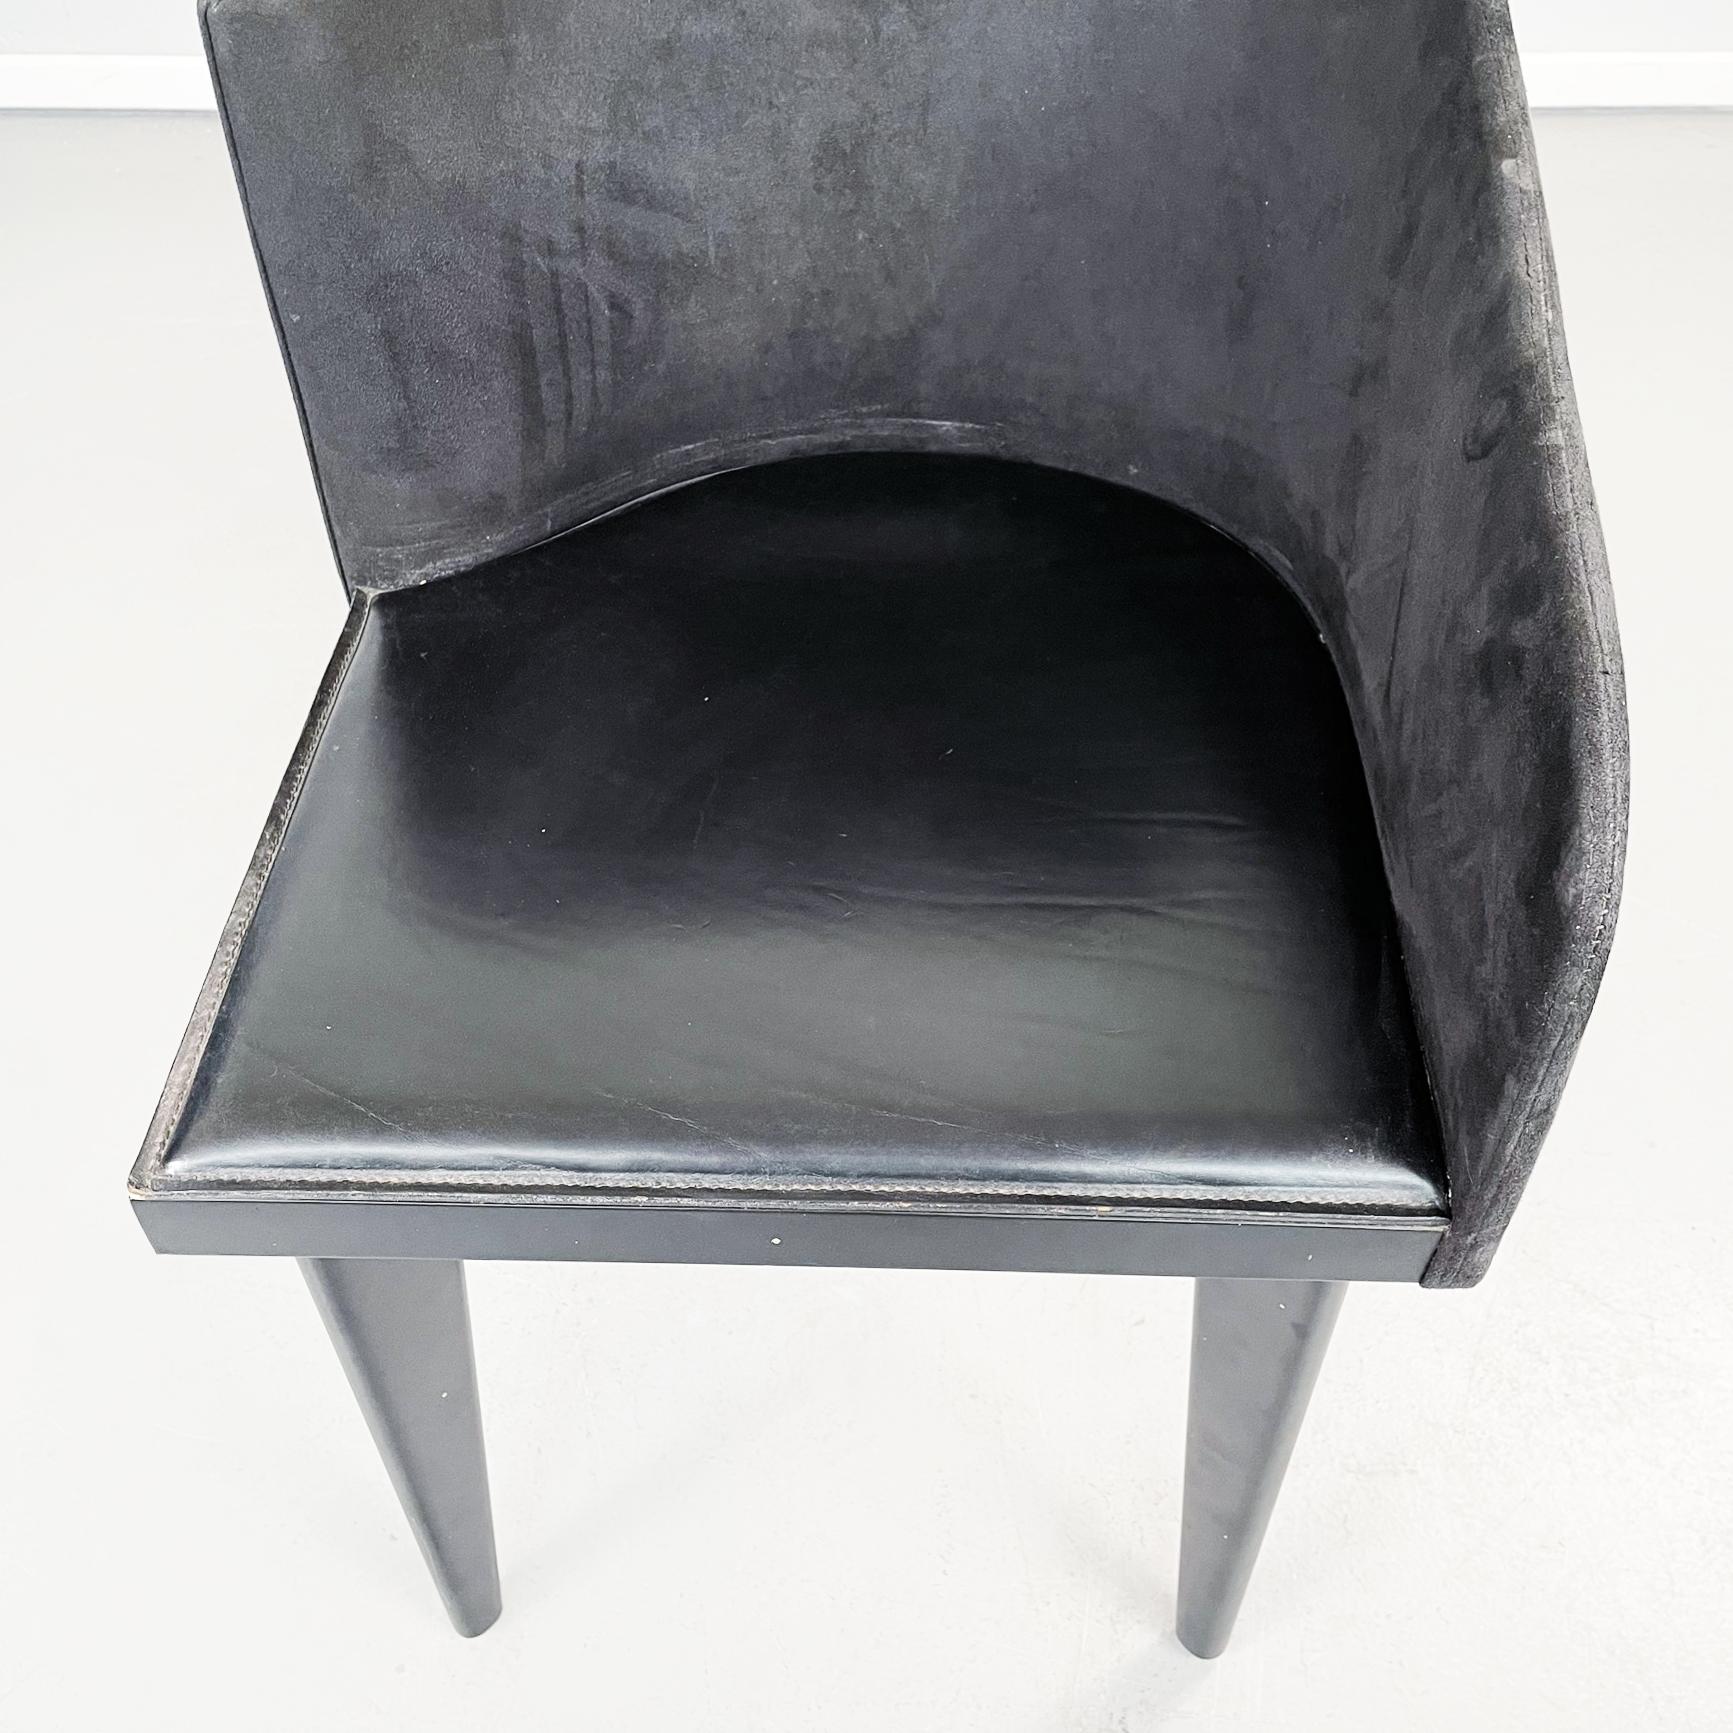 Italian Modern Black Chairs Toscana by Sartogo and Grenon for Saporiti, 1980s For Sale 7